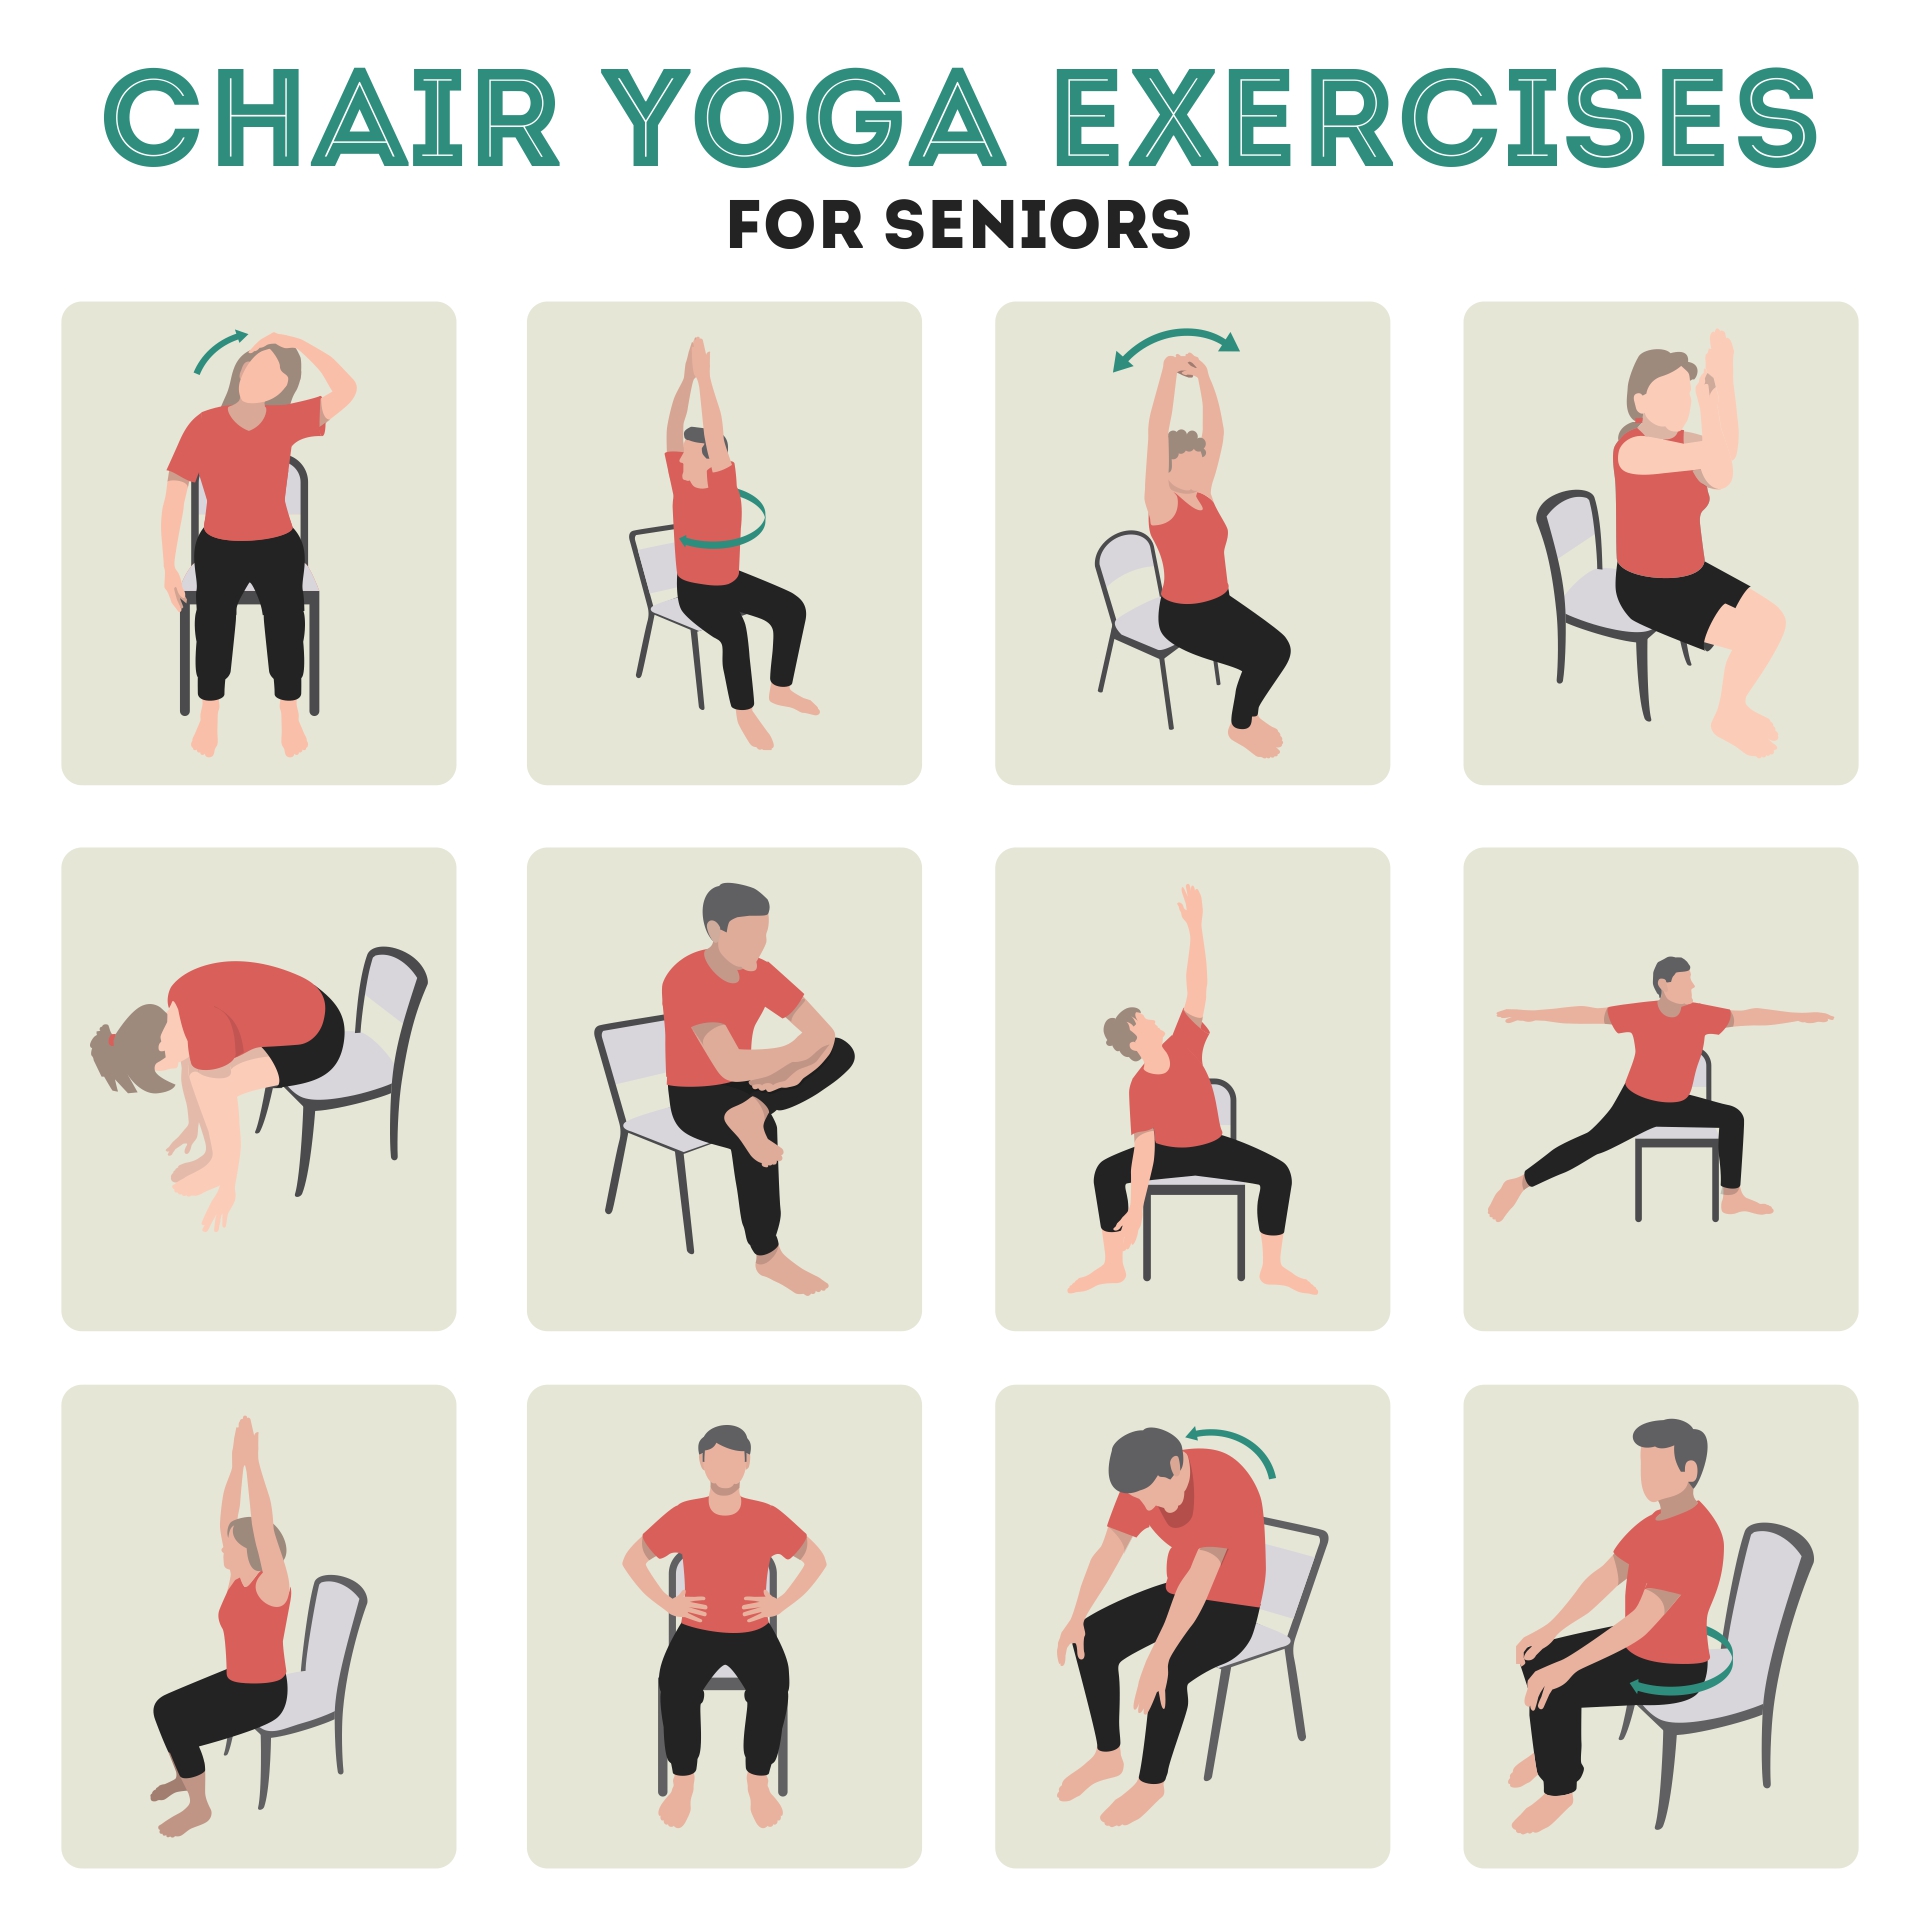 Chair Yoga Poses For Kids Cards